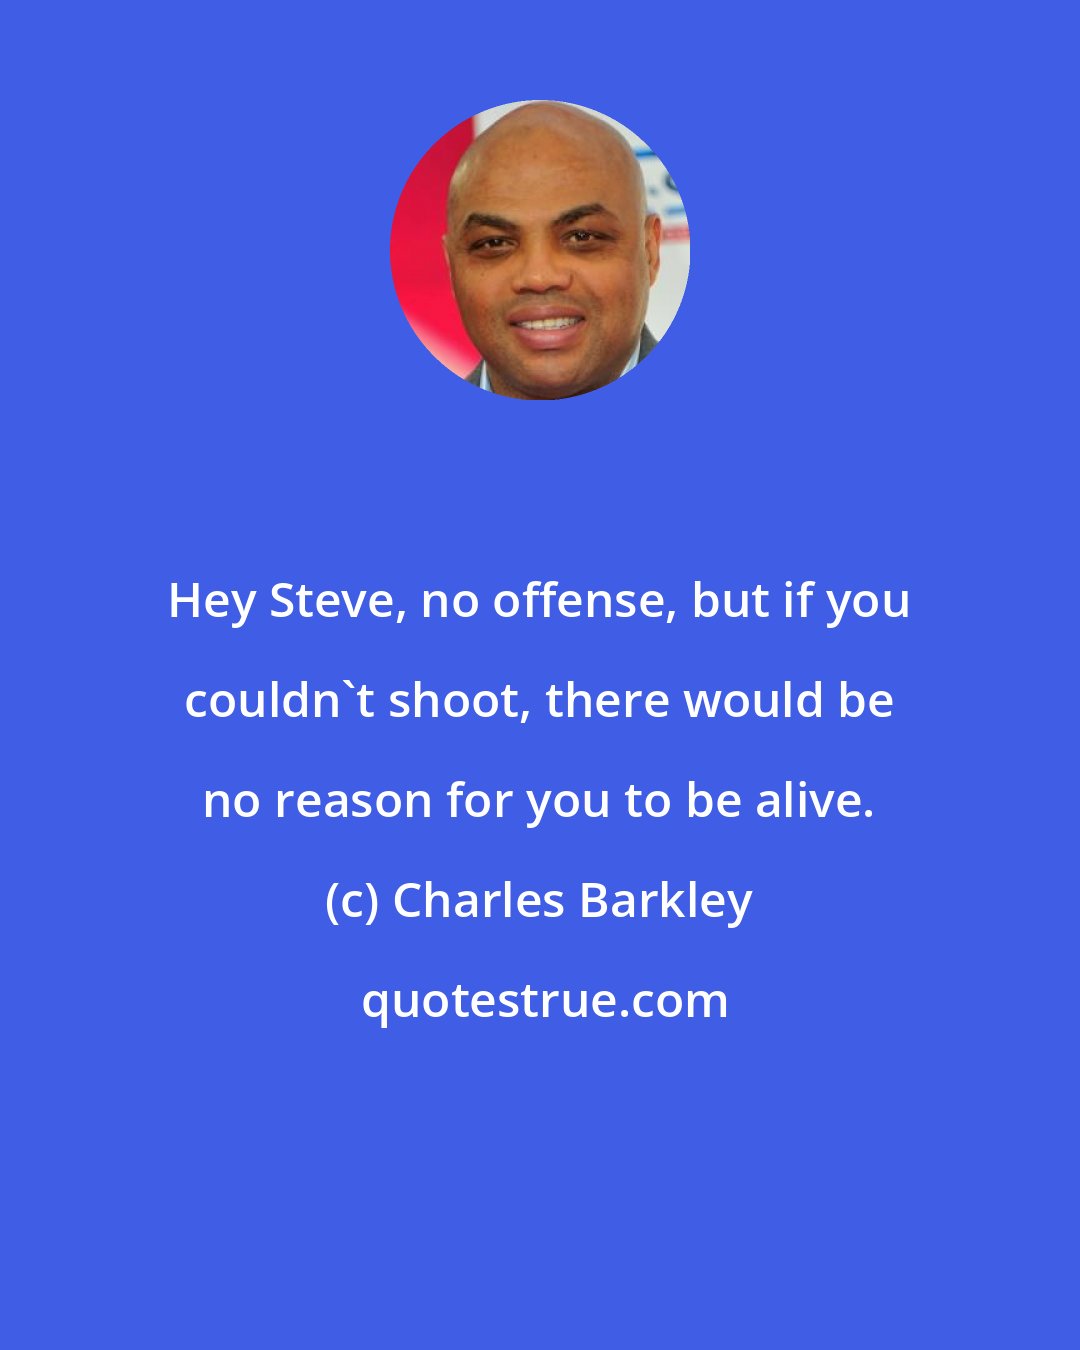 Charles Barkley: Hey Steve, no offense, but if you couldn't shoot, there would be no reason for you to be alive.